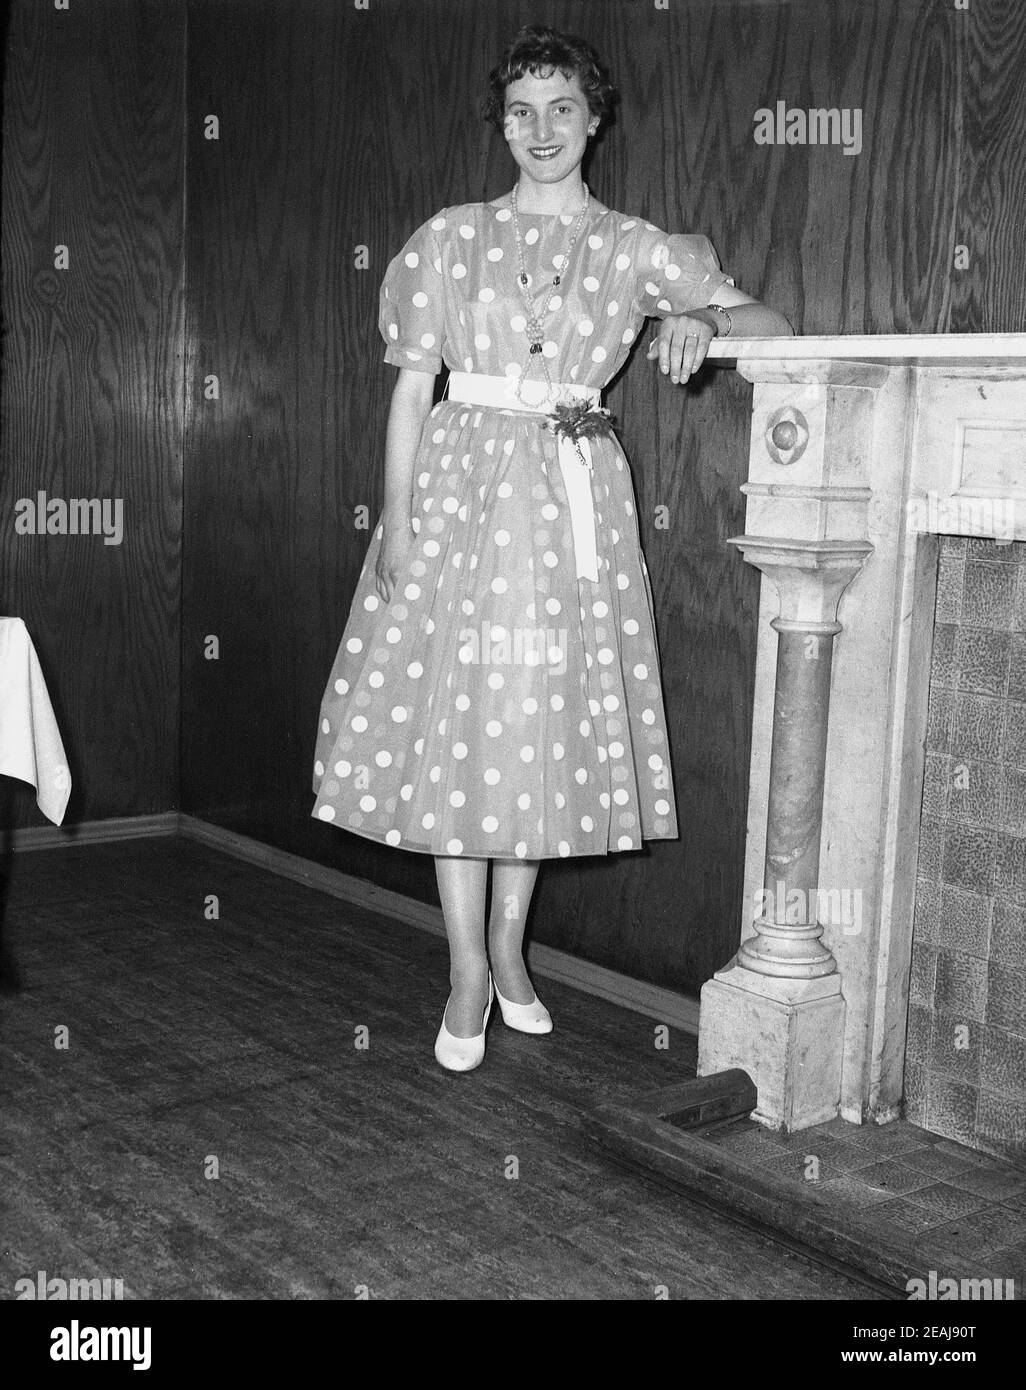 1950s, historical, a young lady wearing a spotted or polka dot dress standing in a function room beside a fireplace. She is celebrating her 21at birthday. Such a party dress with dots on a background with a belt around the middle was in fashion at the time of the retro swing and rockabiliy era, one of the early styles of rock and roll music. Stock Photo